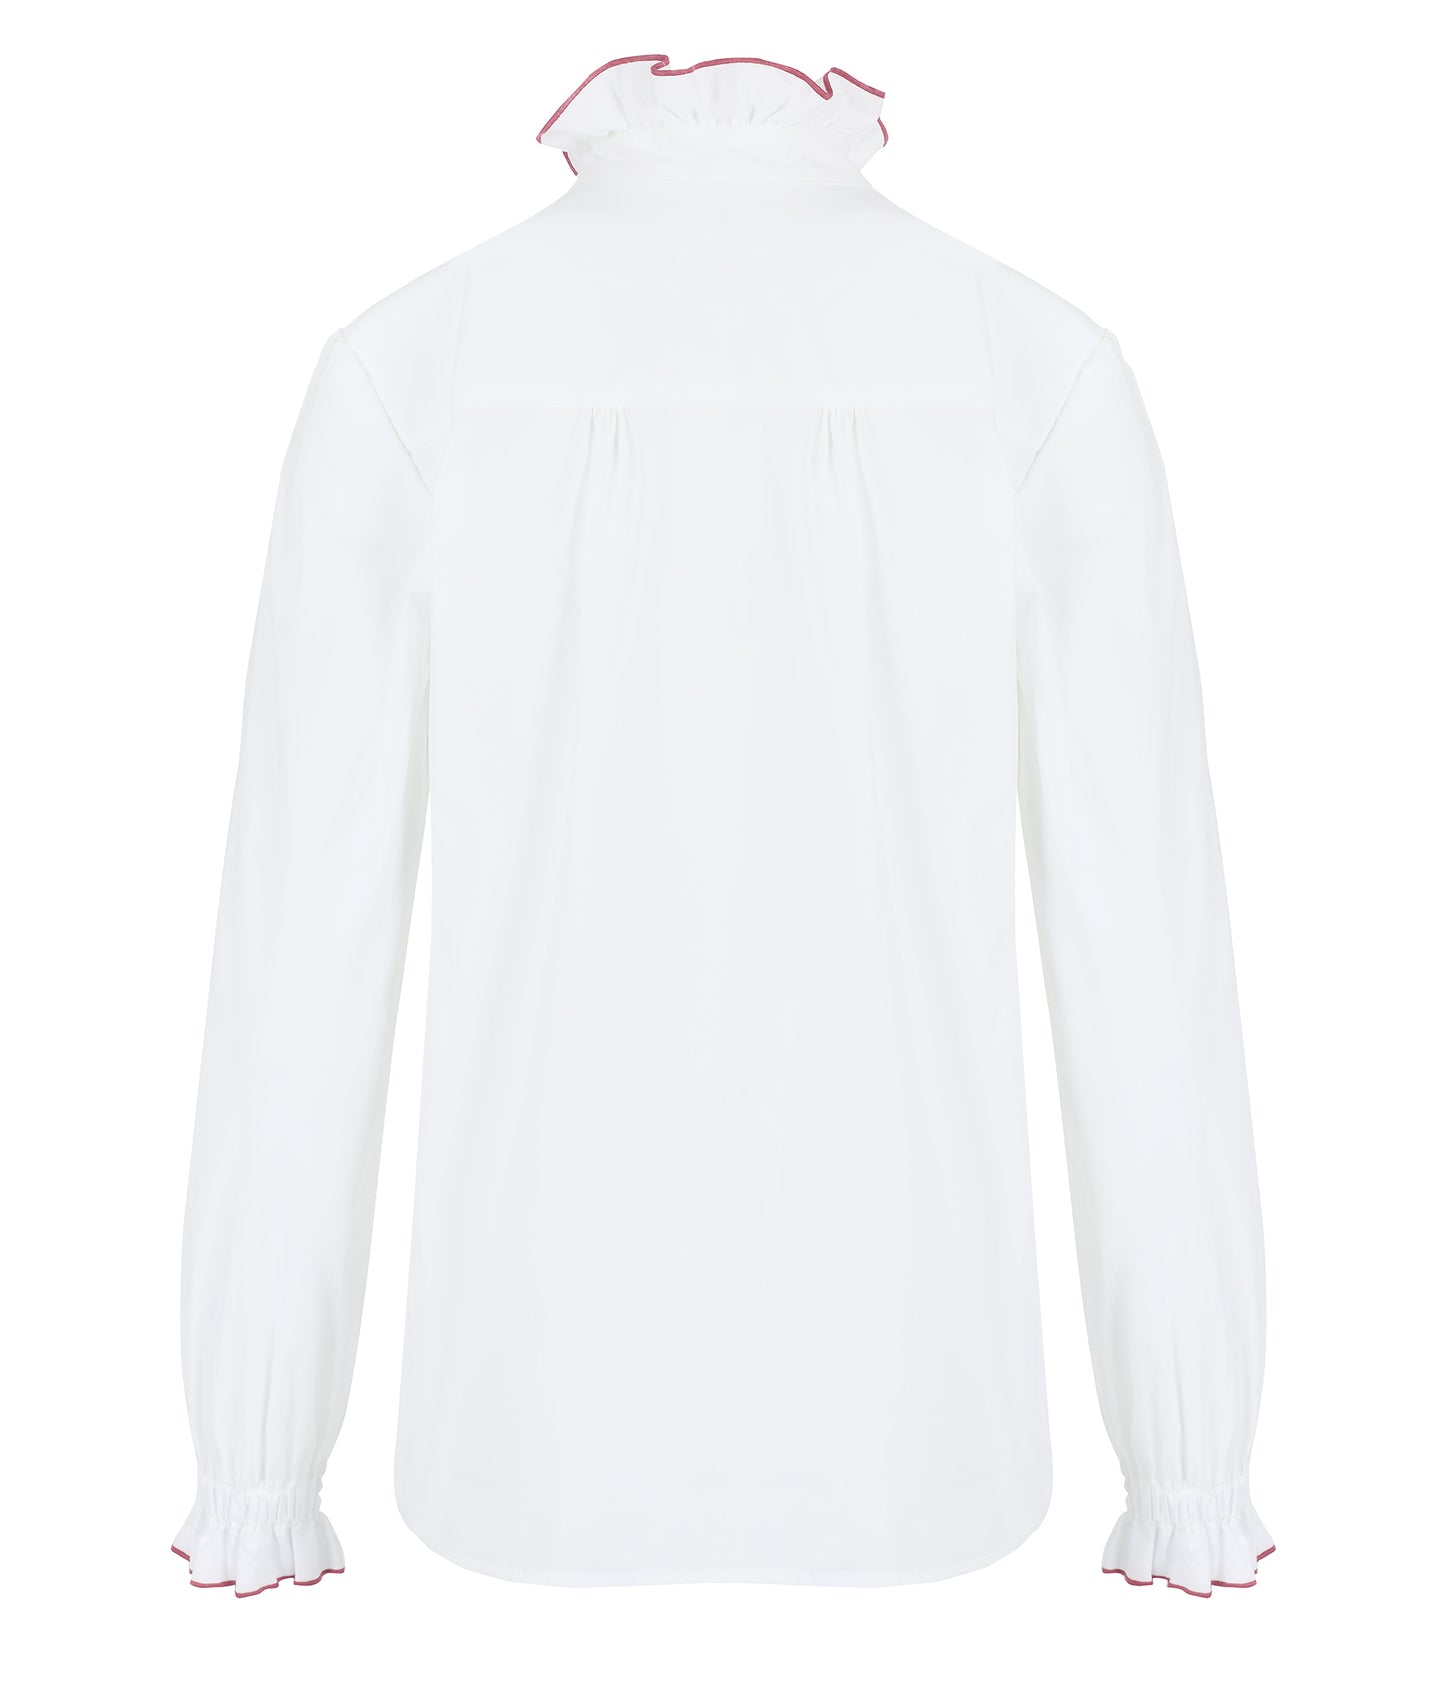 Frill Collar Shirt in White Cotton